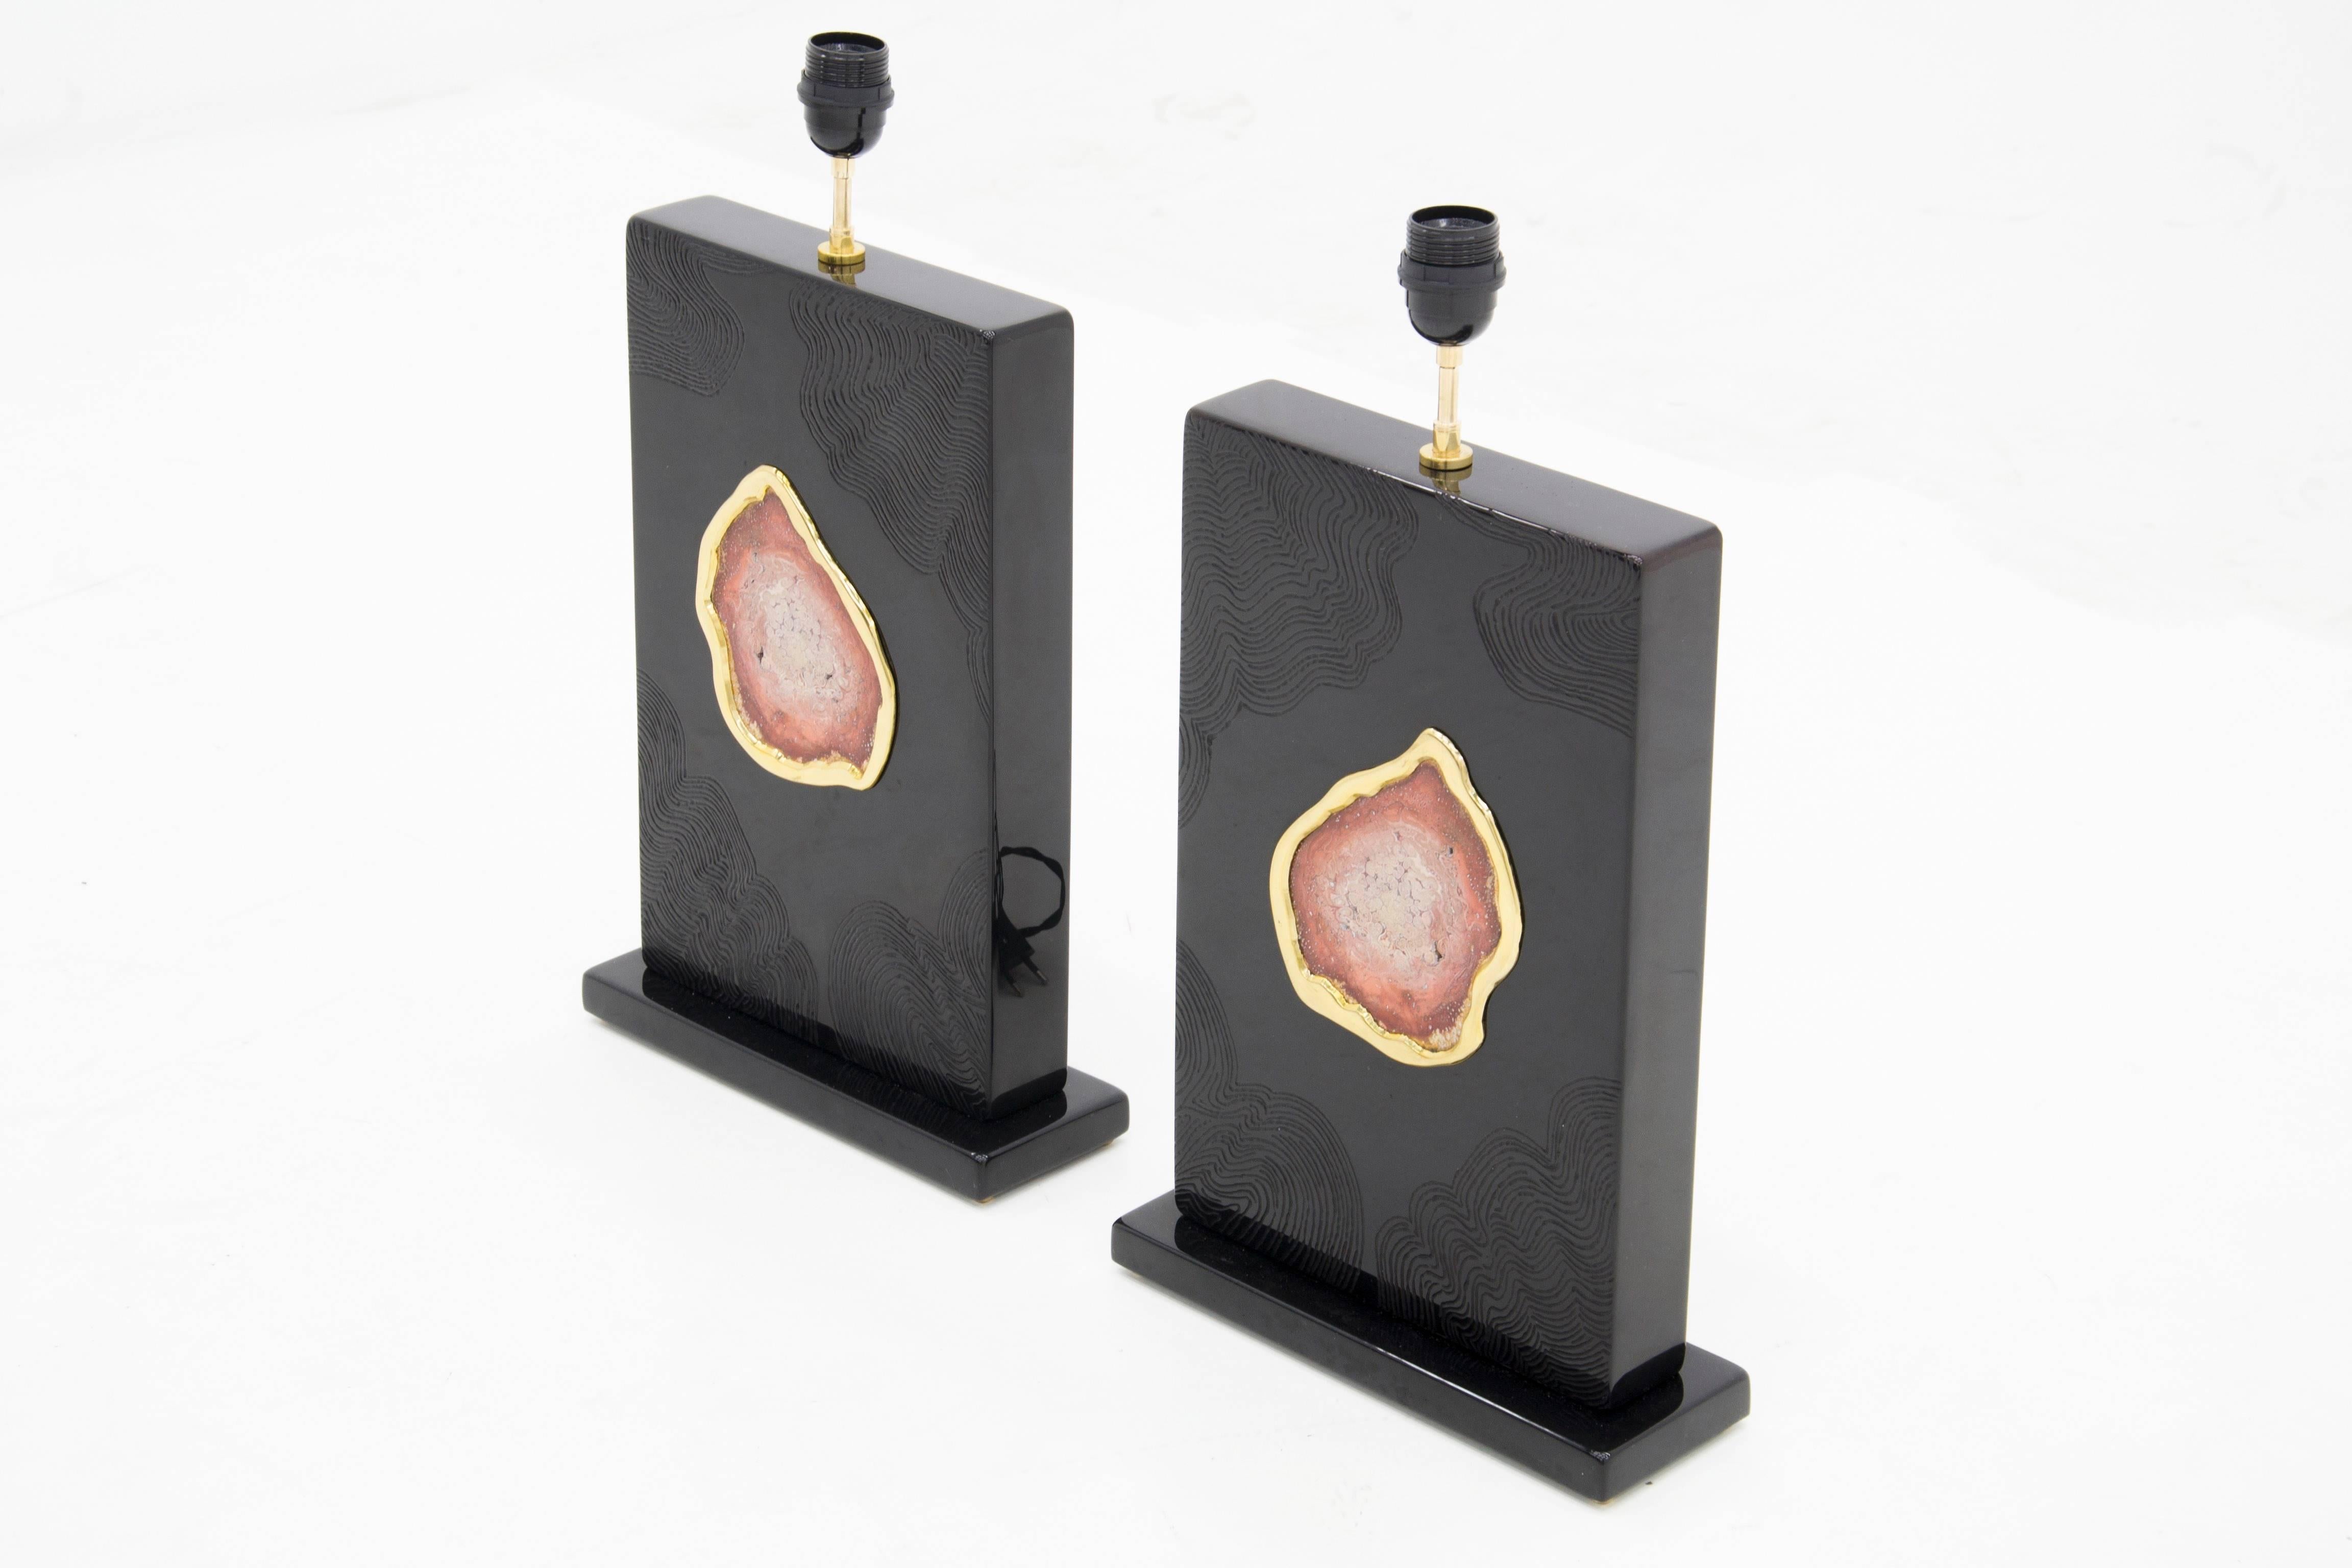 One of a kind studio built pair of lamps in black resin inlaid red stone by Stan Usel.
These pieces are made exclusively and distributed in USA for Saint Germain antiques. Exceptional craftsmanship. All pieces can be custom-made to order. Signed by